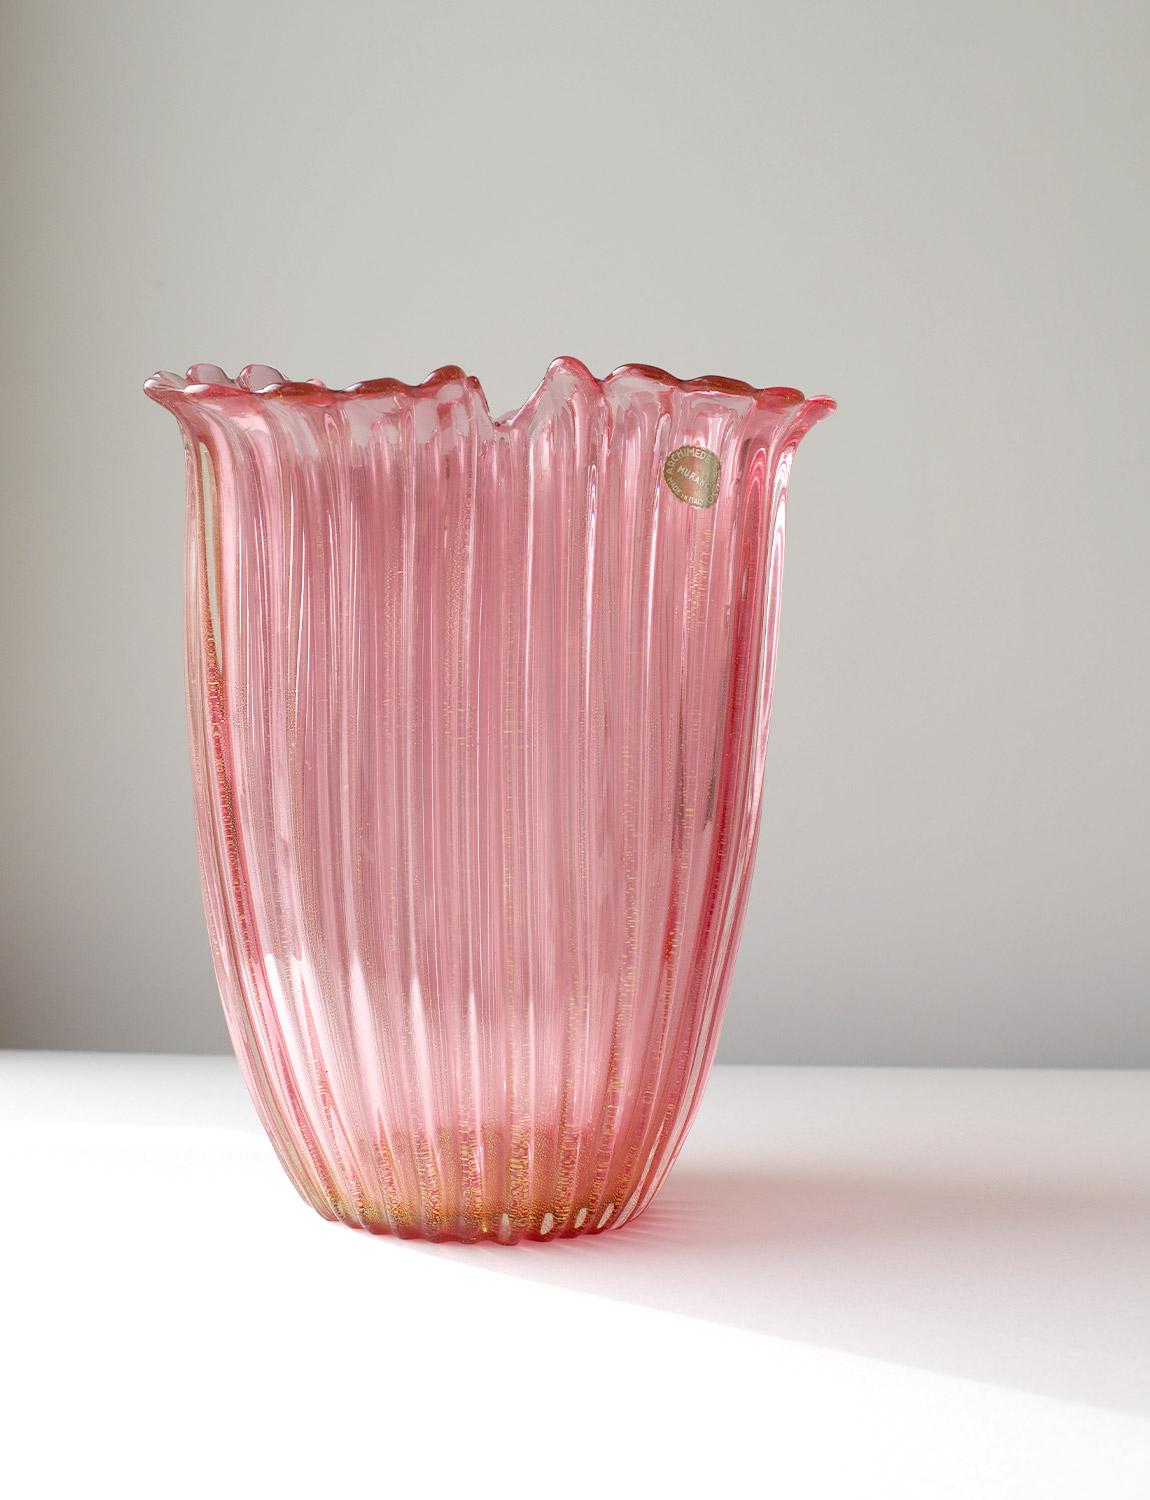 An exceptional Archimede Seguso hand-blown Murano glass vase in deep pink with gold flecks throughout. The piece has an elegant three pronged petal like shape and has the original sticker in place. Found in a private home in Rome, it is in very good